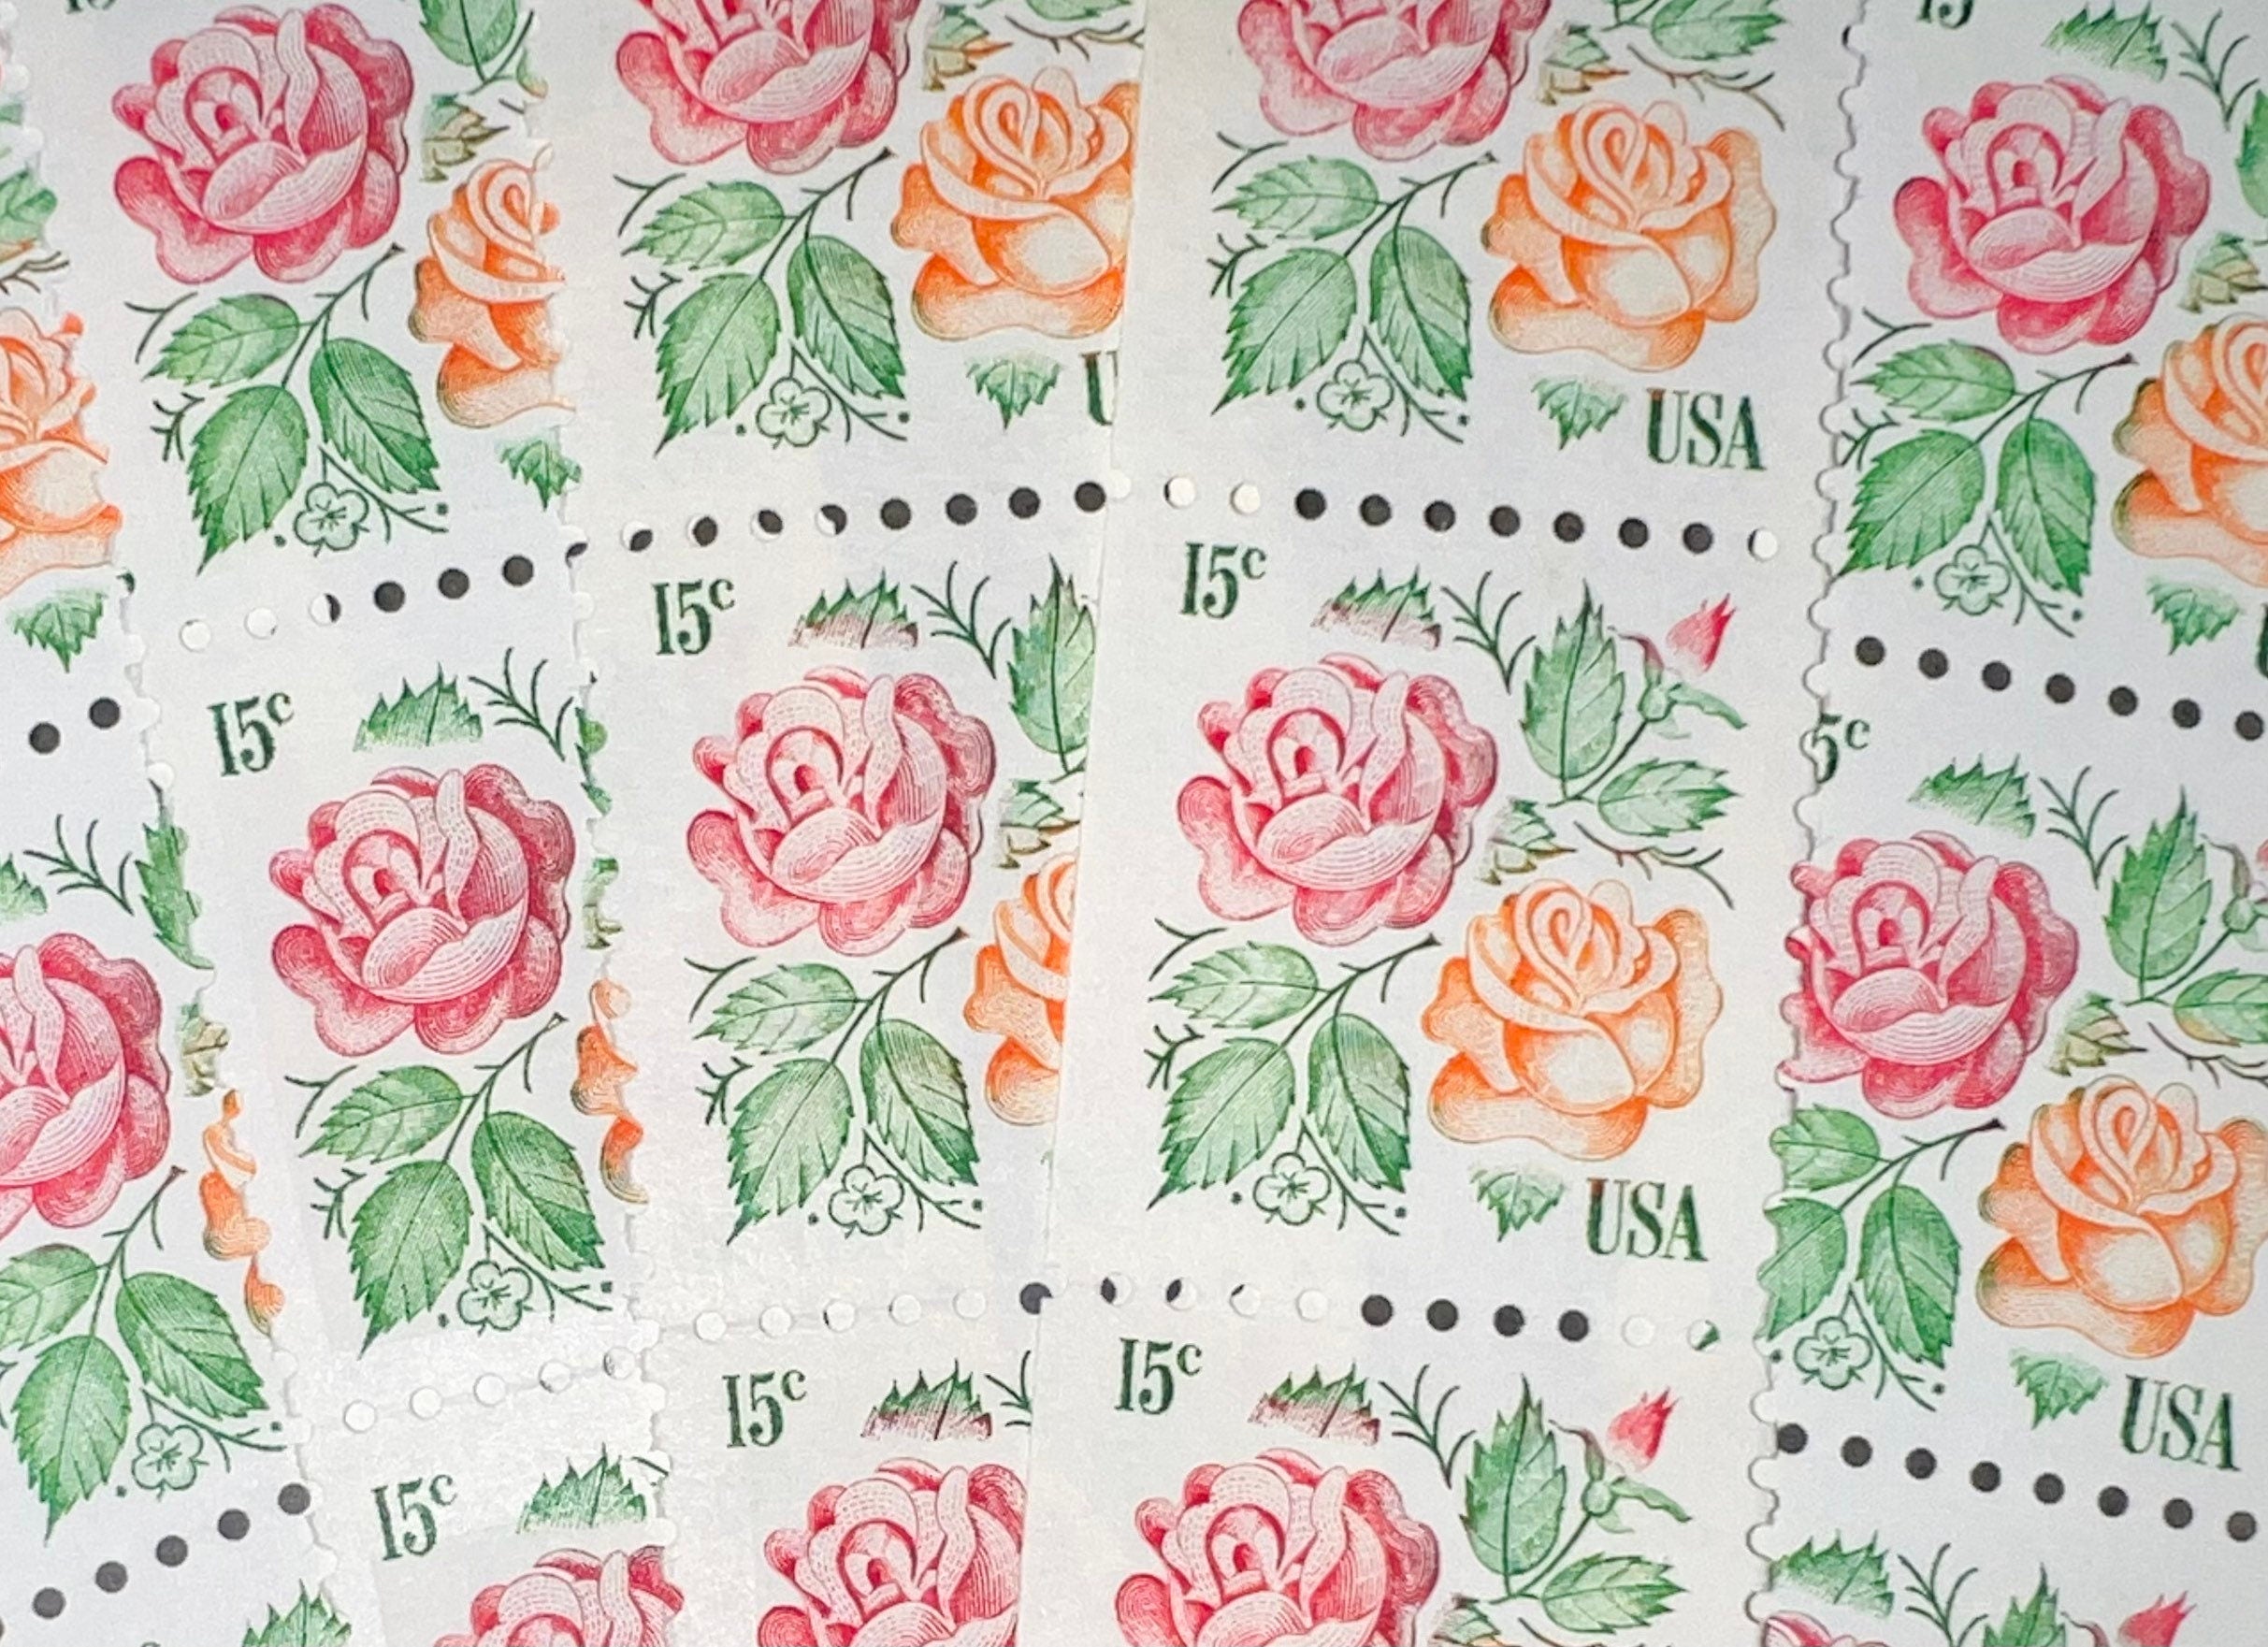 Roses Stamps, Flower Stamps,roses Postage Stamps, Roses, Floral Stamps,  Floral, Flower Postage Stamps, Stamps, Worldwide Stamps 